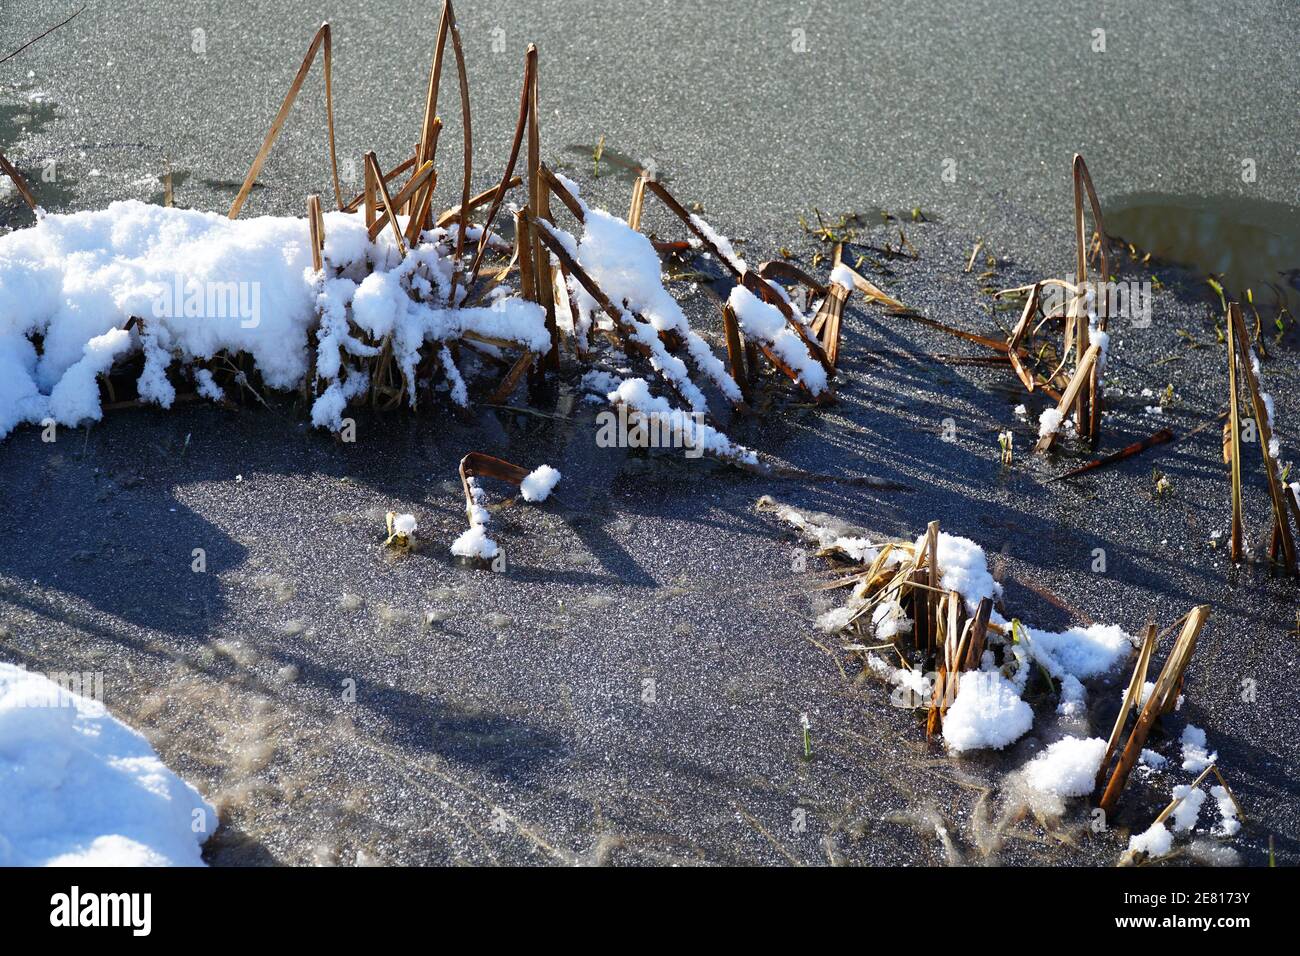 Dead reeds in a frozen pond Stock Photo